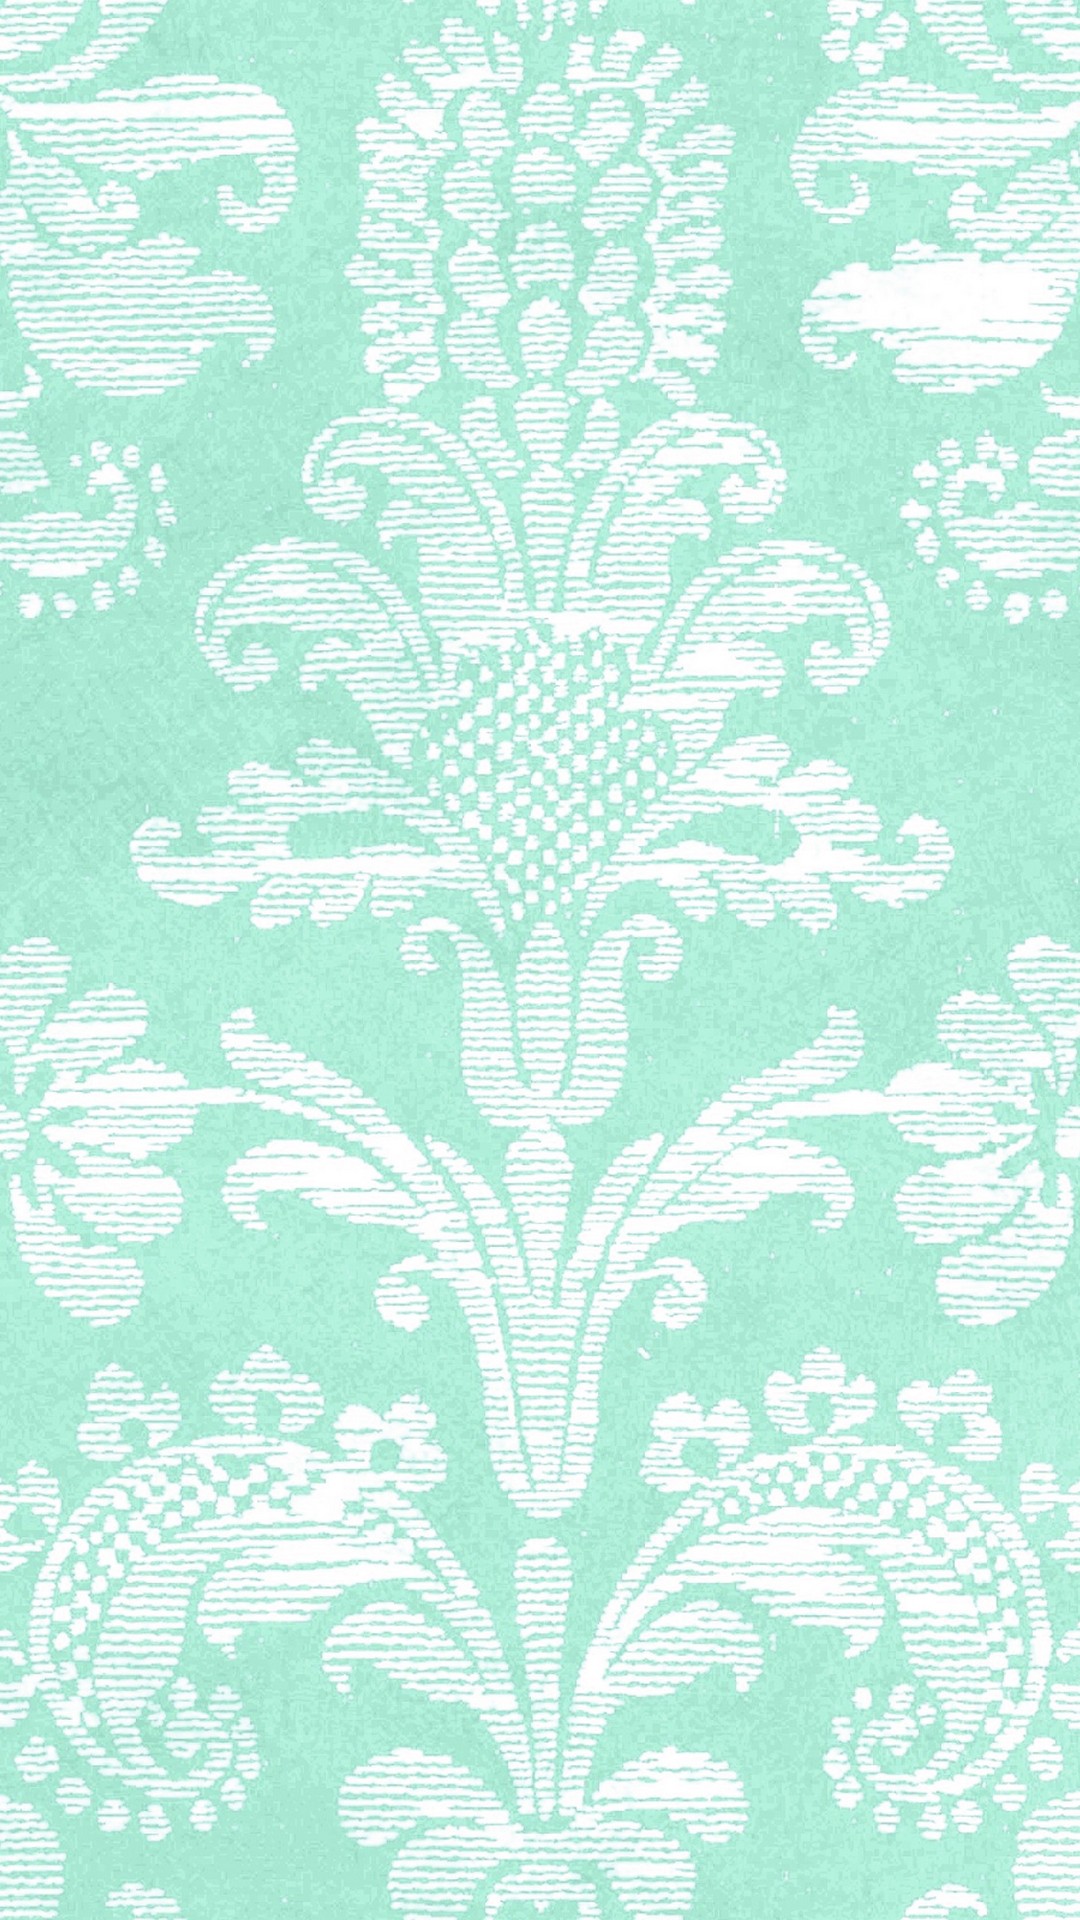 Mint Green iPhone X Wallpaper with image resolution 1080x1920 pixel. You can use this wallpaper as background for your desktop Computer Screensavers, Android or iPhone smartphones